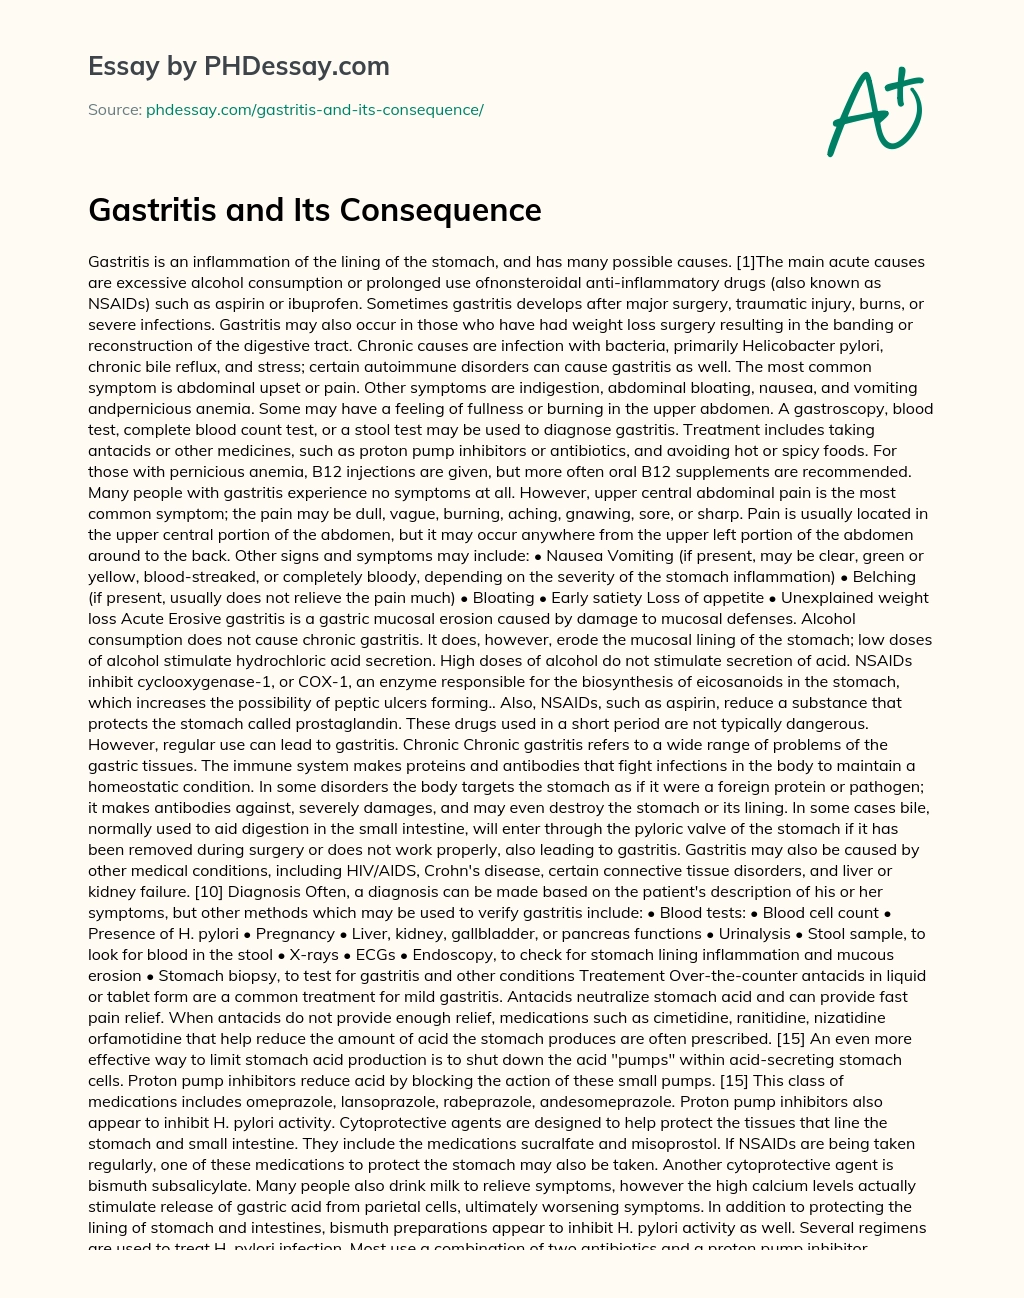 Gastritis and Its Consequence essay